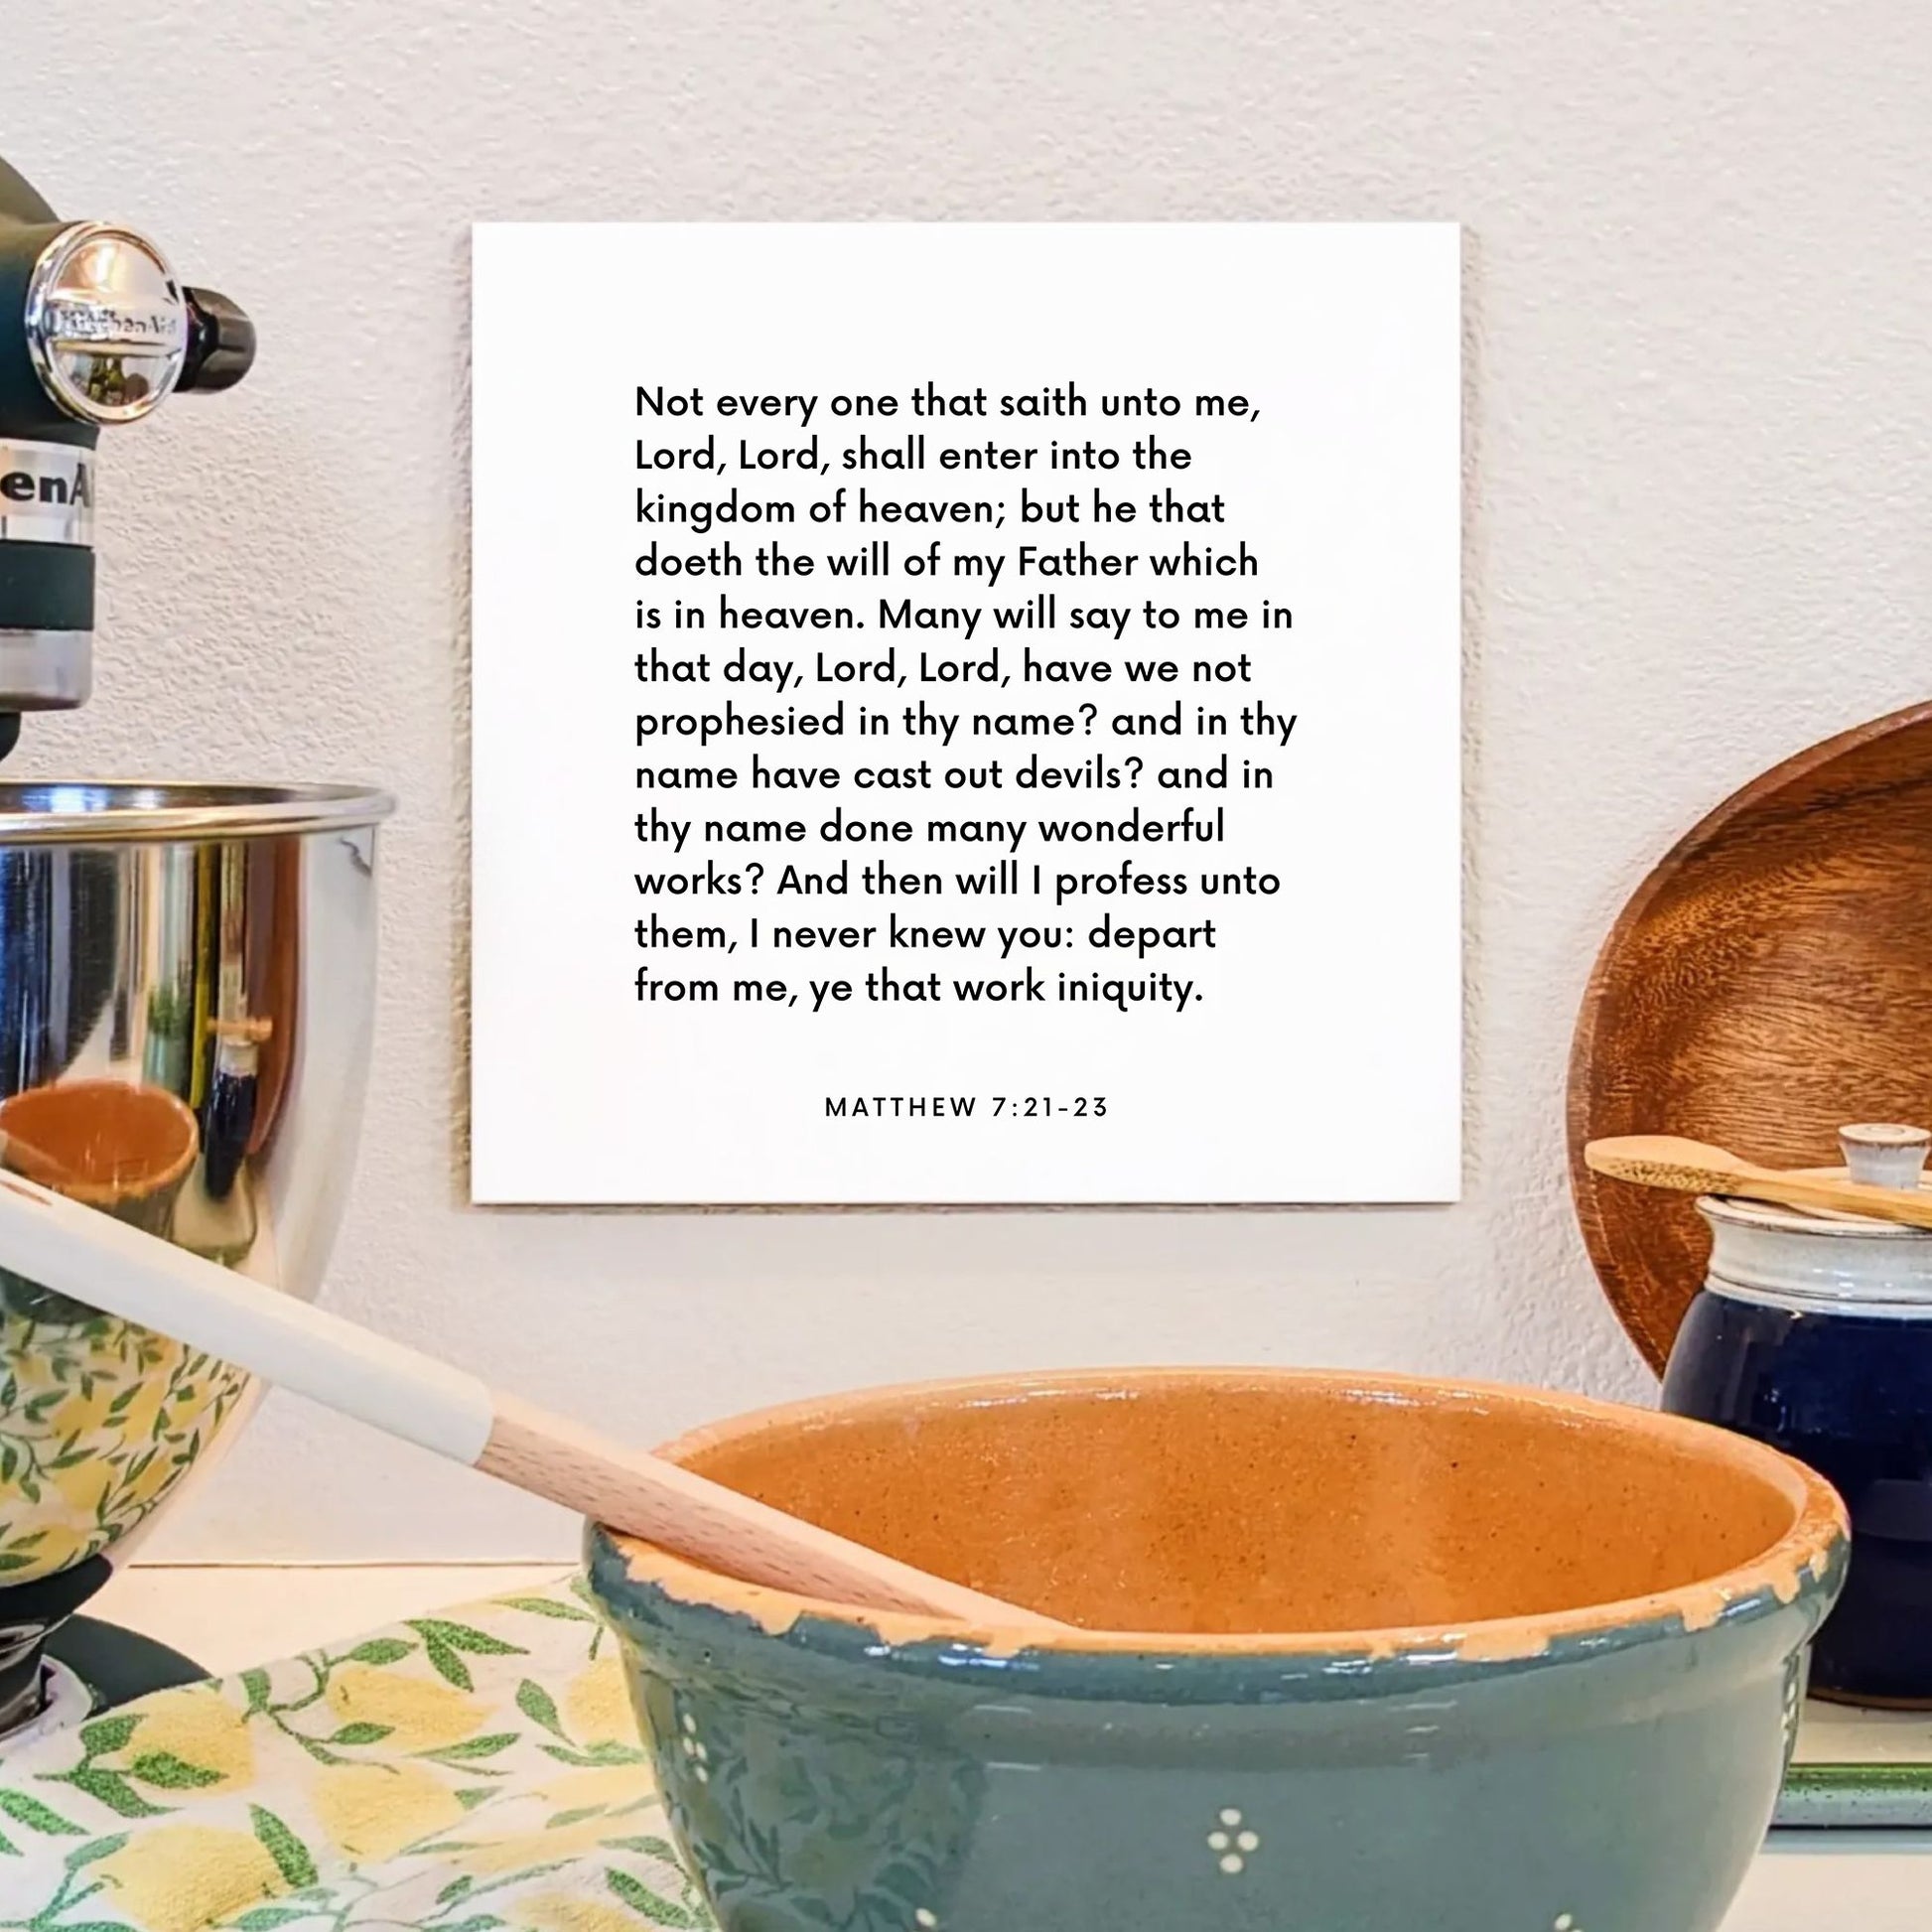 Kitchen mouting of the scripture tile for Matthew 7:21-23 - "Have we not prophesied in thy name?"